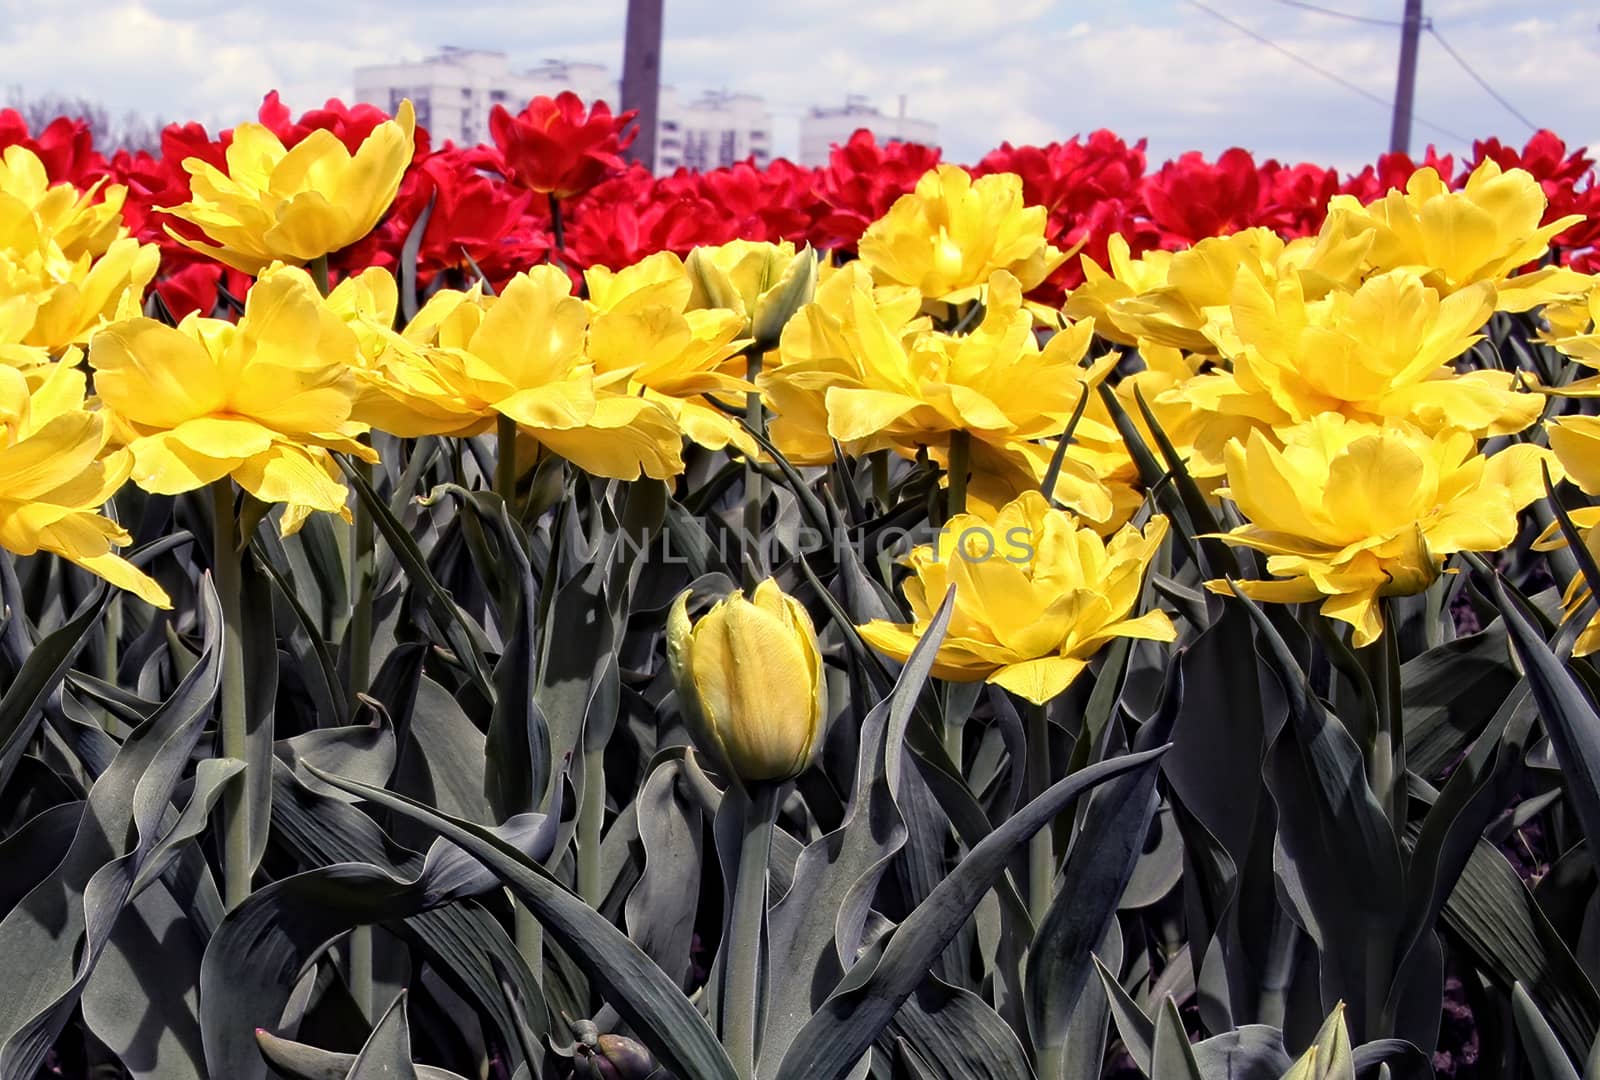 Beautiful red and yellow tulips with green leaves. Spring flowers bloom in a city flowerbed.